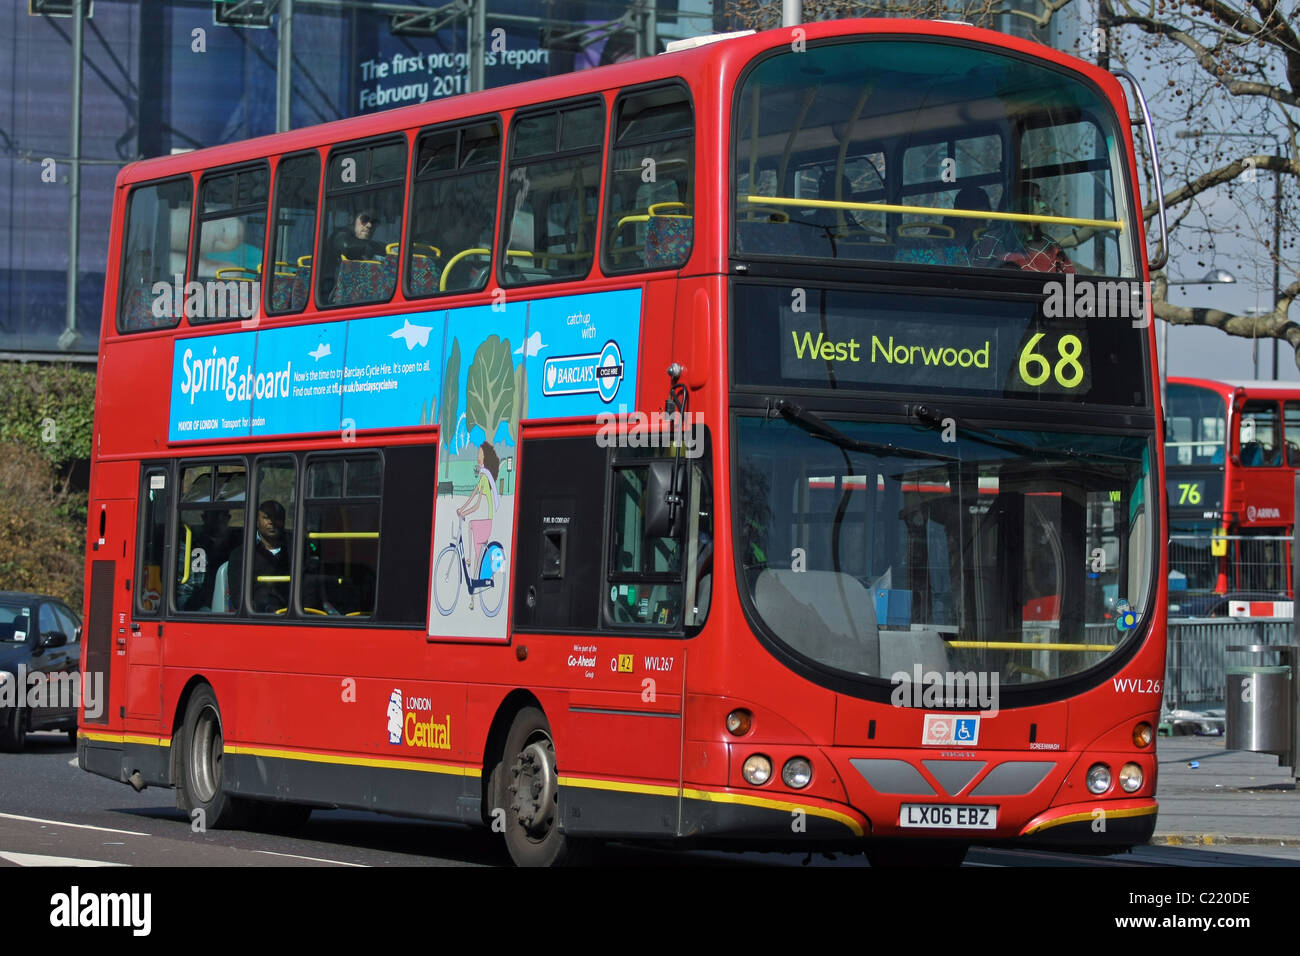 A double decker red London bus traveling on its route through Waterloo, London, England Stock Photo